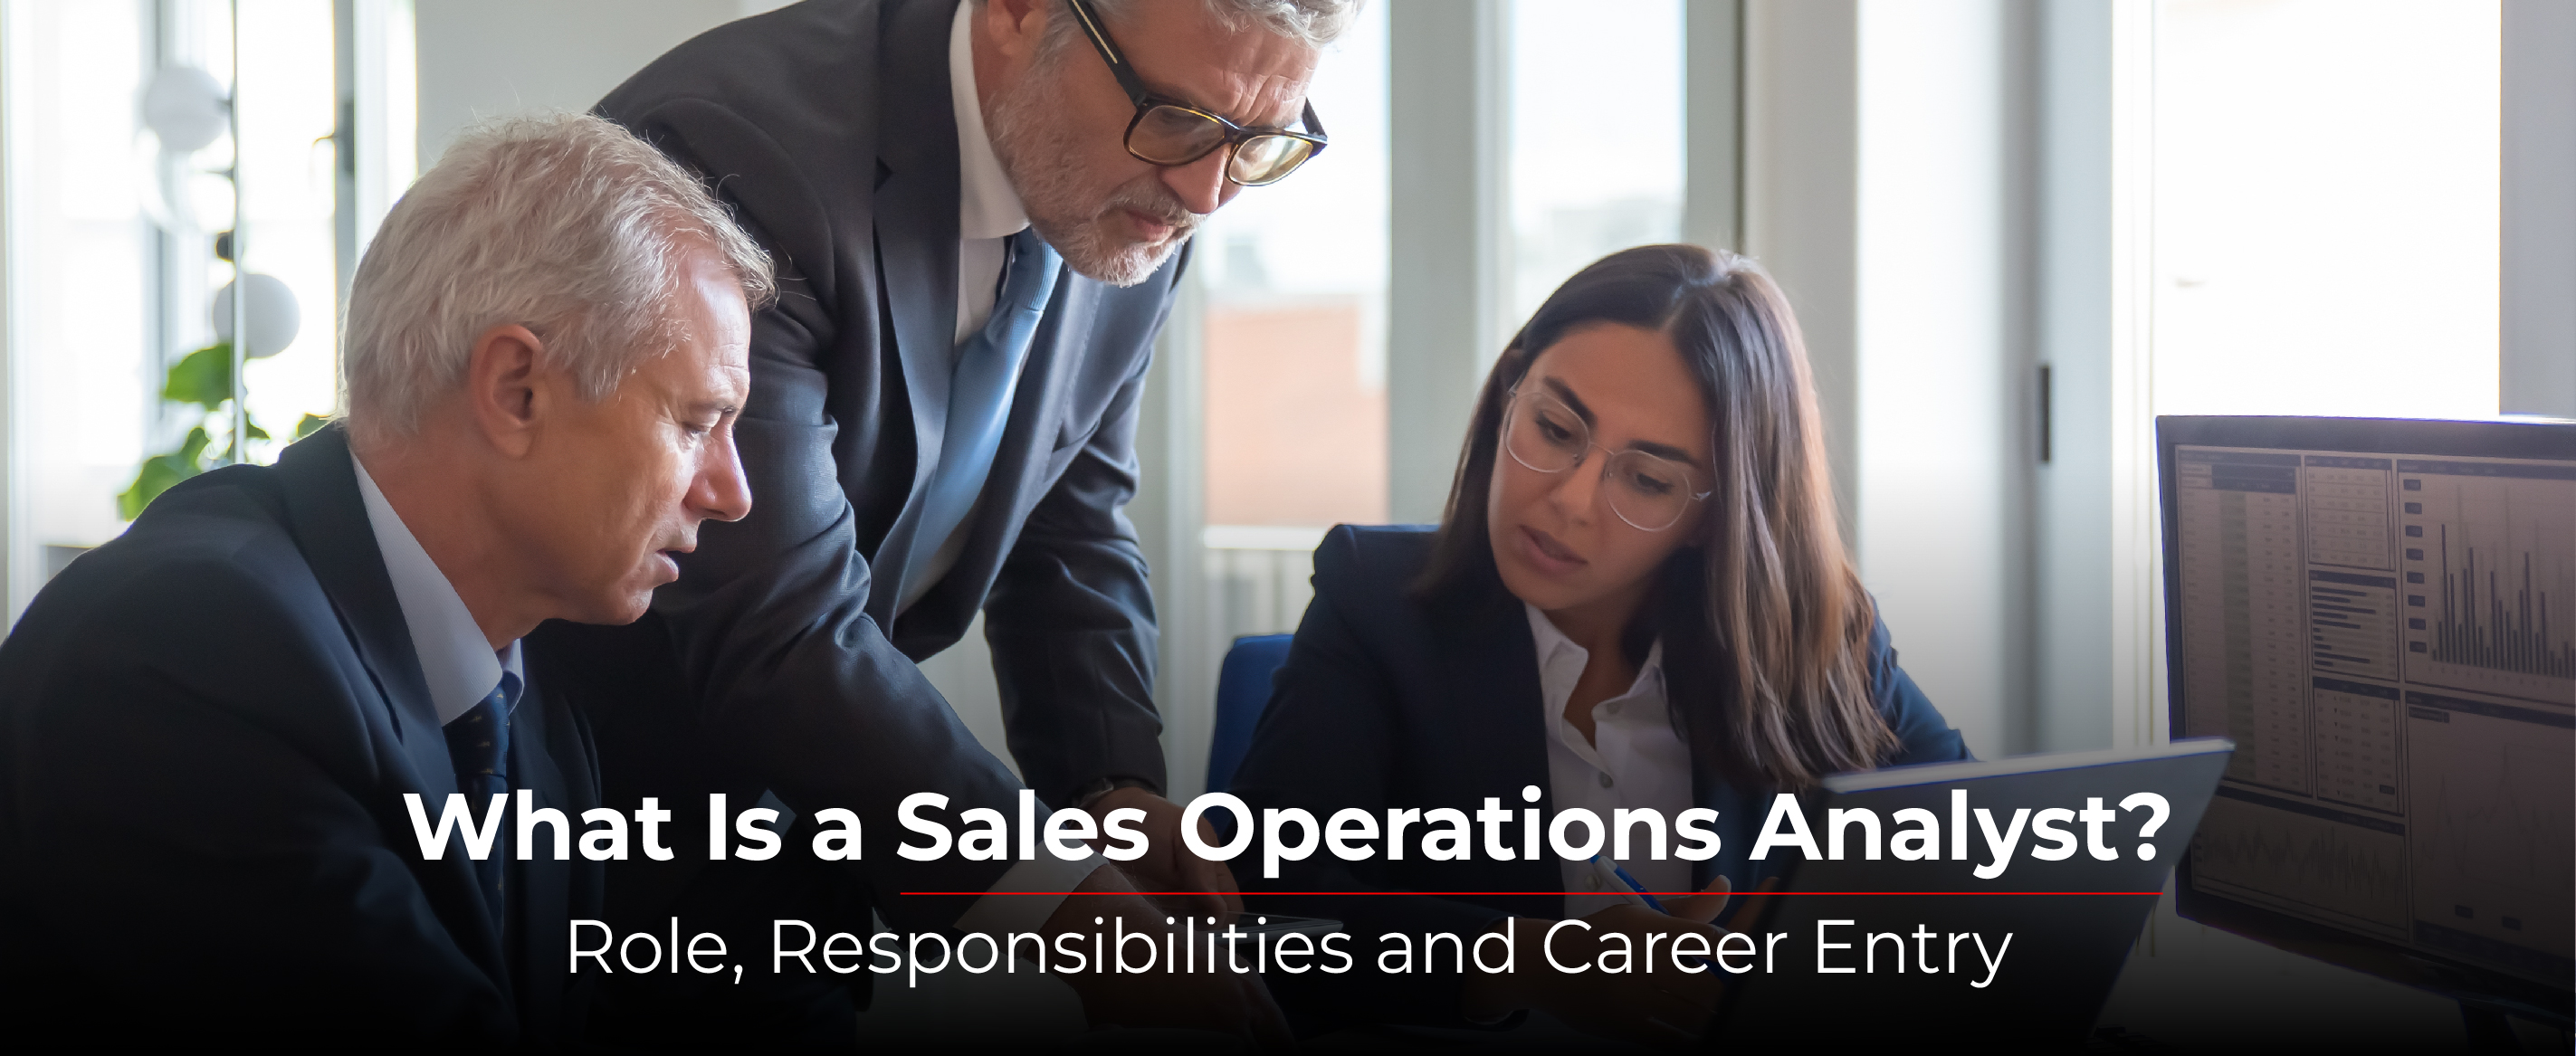 What Is a Sales Operations Analyst? Role, Responsibilities and Career Entry